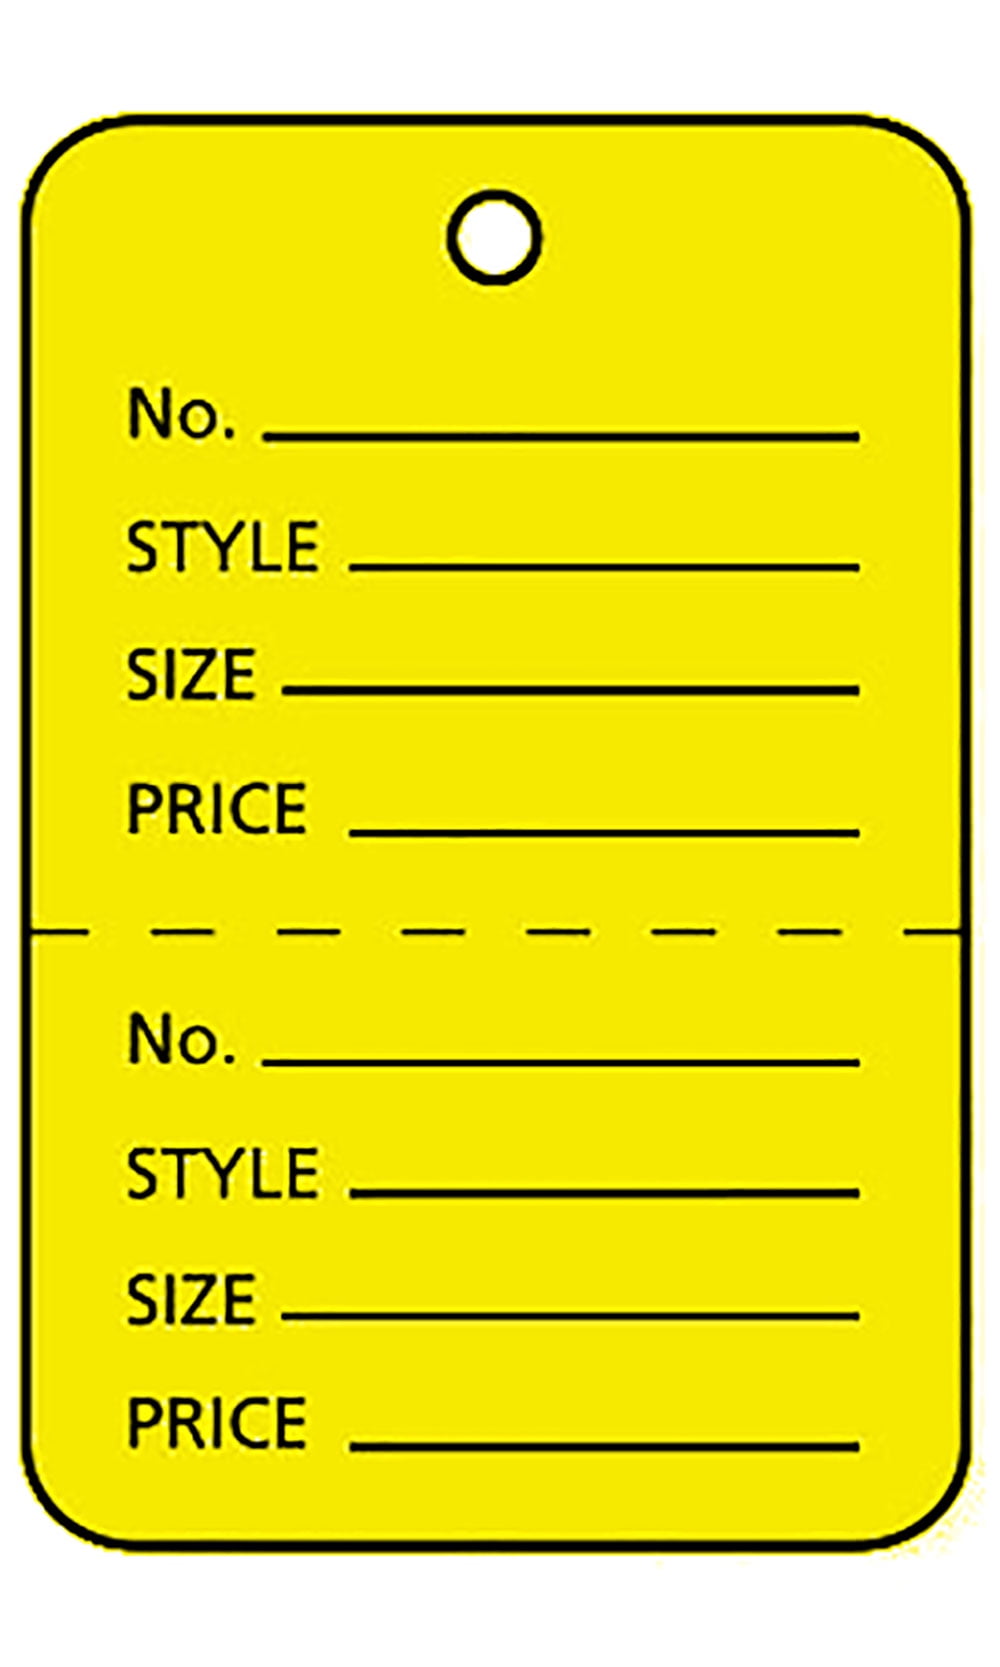 100 Clothing Tags Perforated Unstrung Pricing Label Small Retail Sell Store 